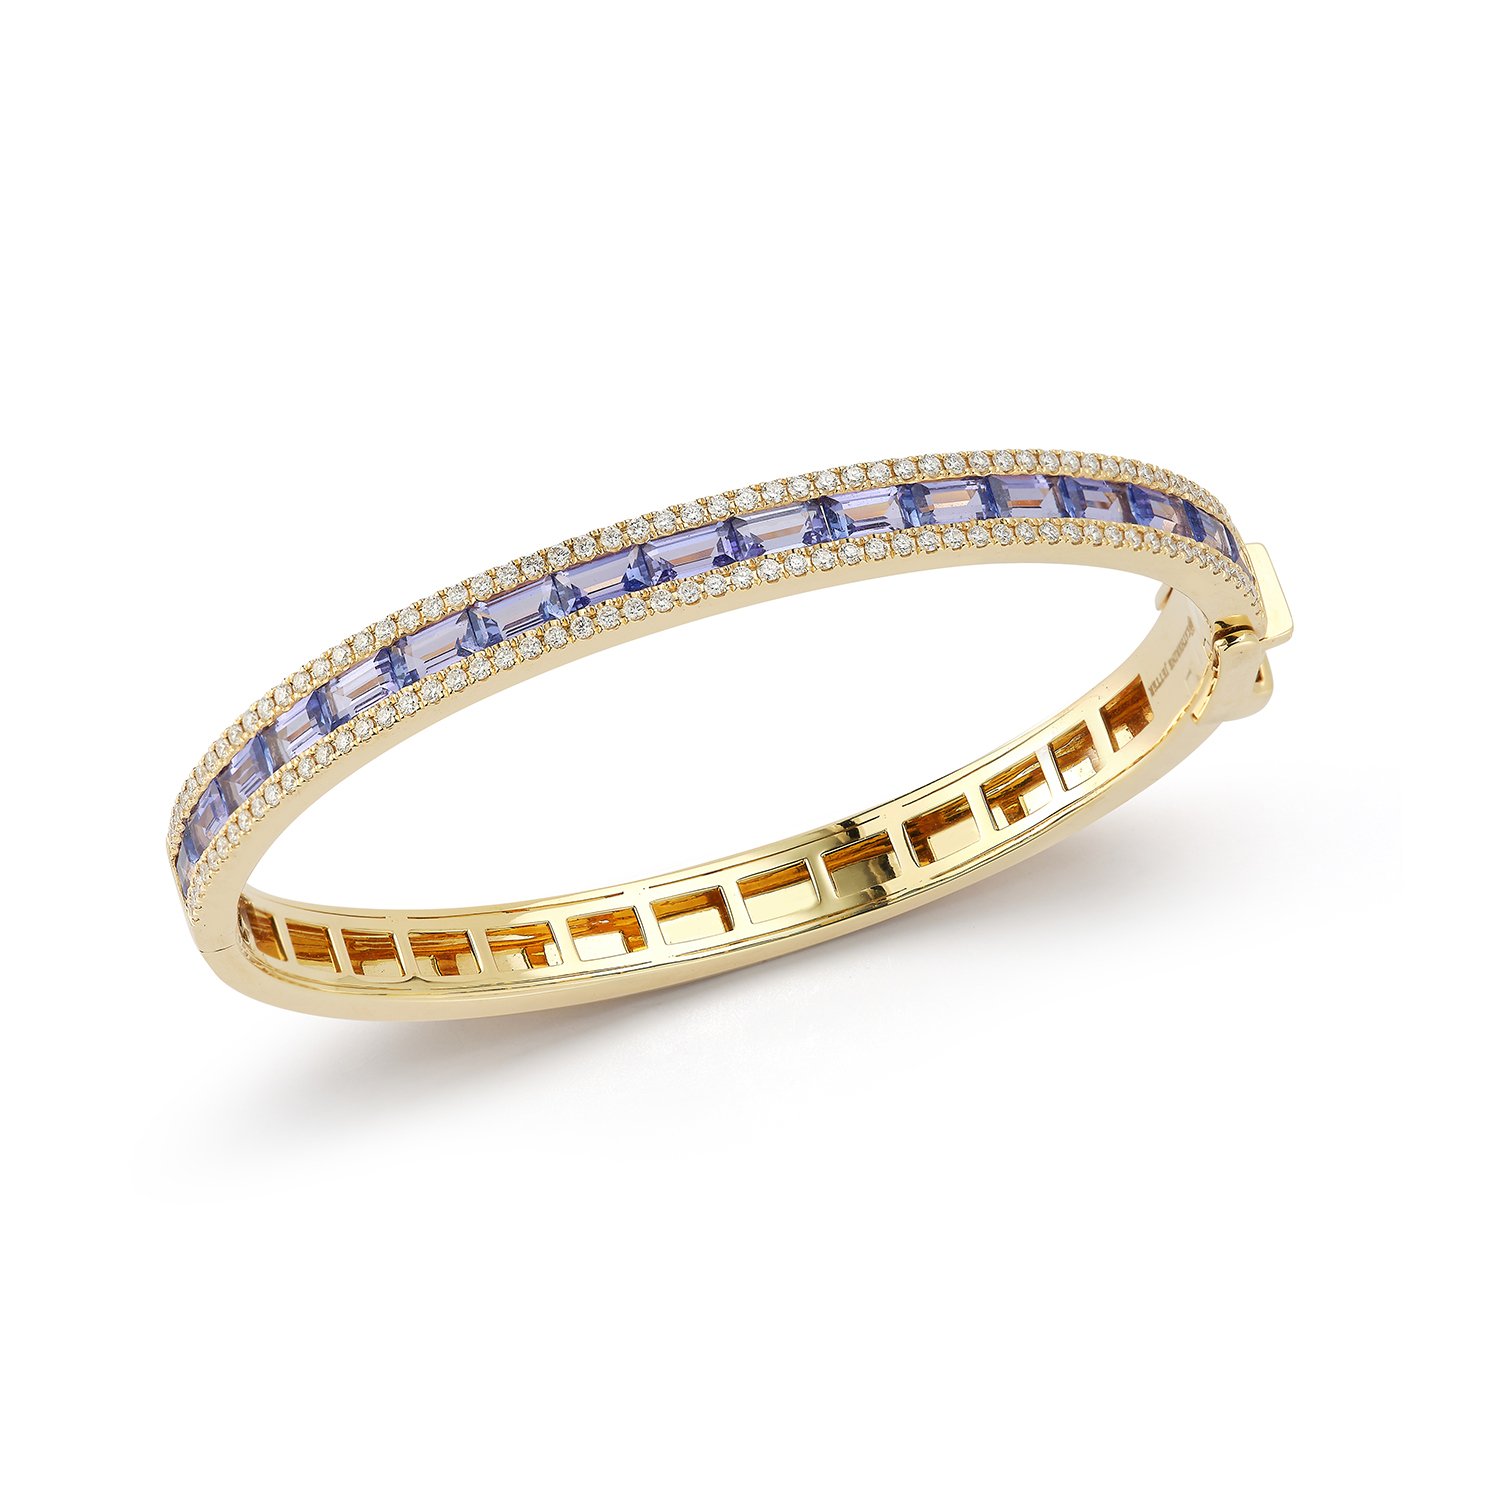 Origami Bangle Bracelet with Tanzanite and White Diamonds in 18kt Yellow Gold